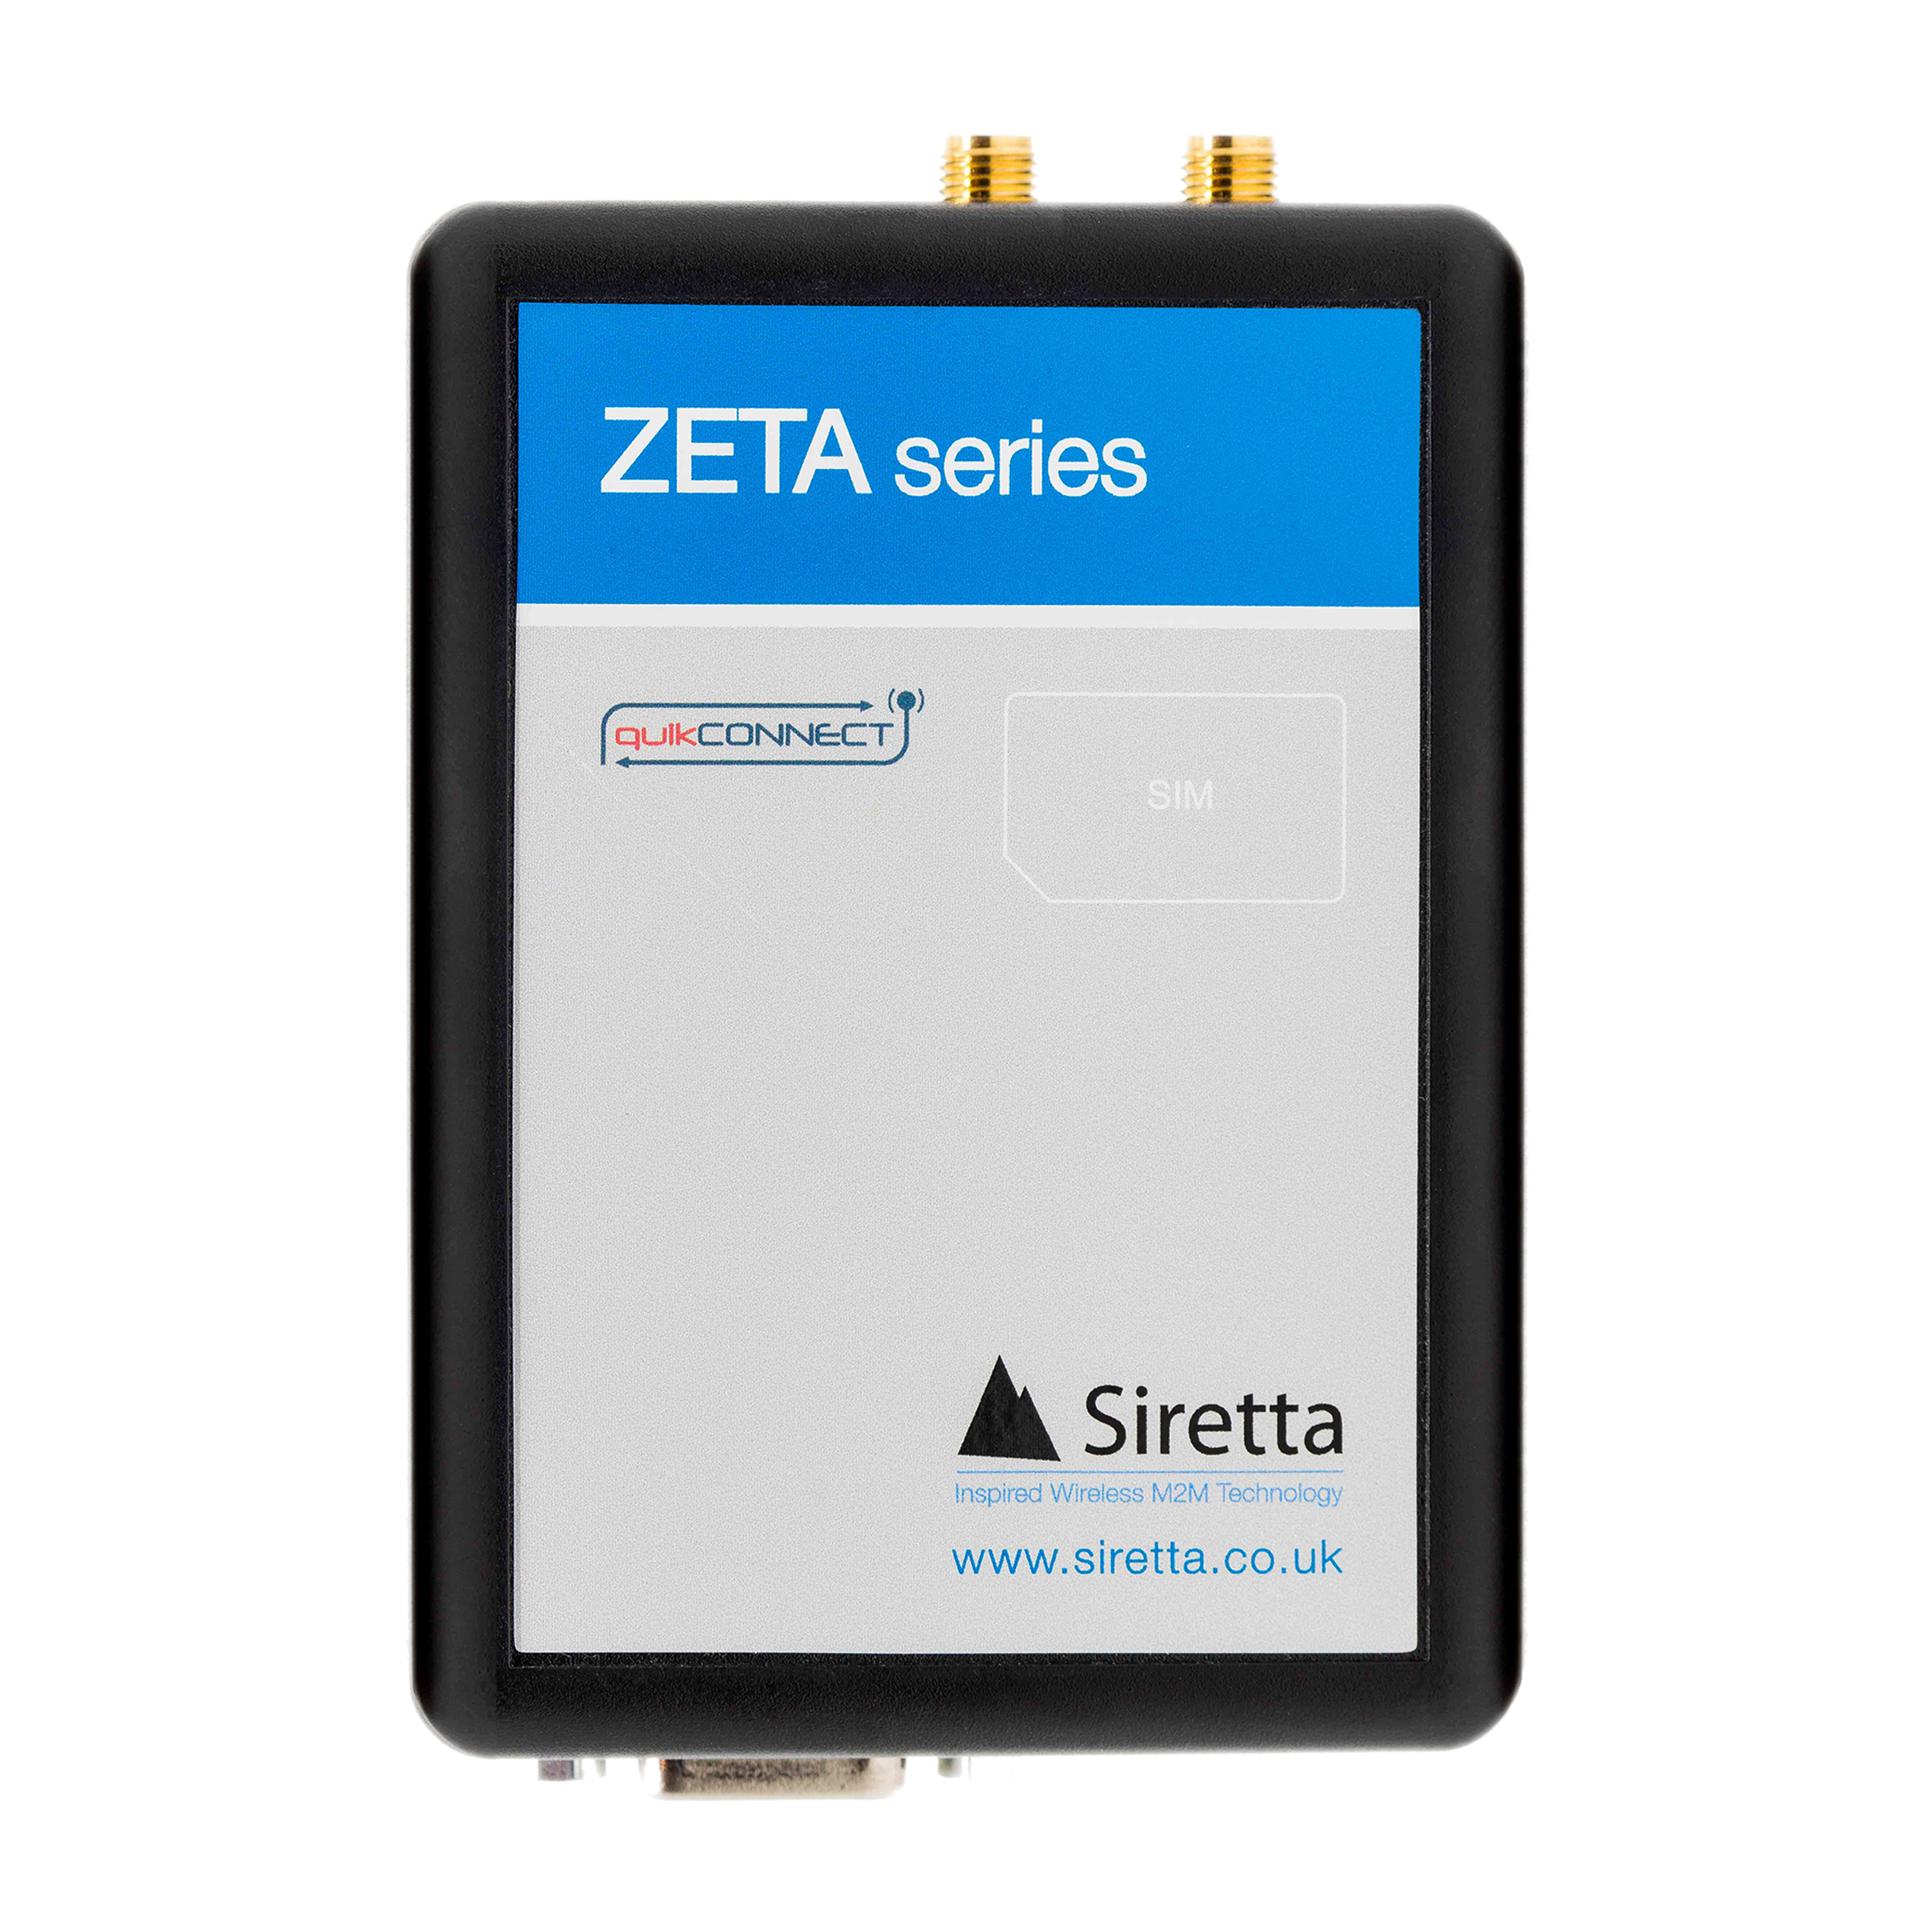 The ZETA-G-GPRS is an industrial modem designed for connecting equipment to the 2G / GSM cellular network. It has a global coverage quad band GPRS class 10 cellular engine offering CSD fall back. The ZETA-G-GPRS incorporates a full GNSS receiver which supports GPS, Glonass and Galileo for advanced tracking applications.